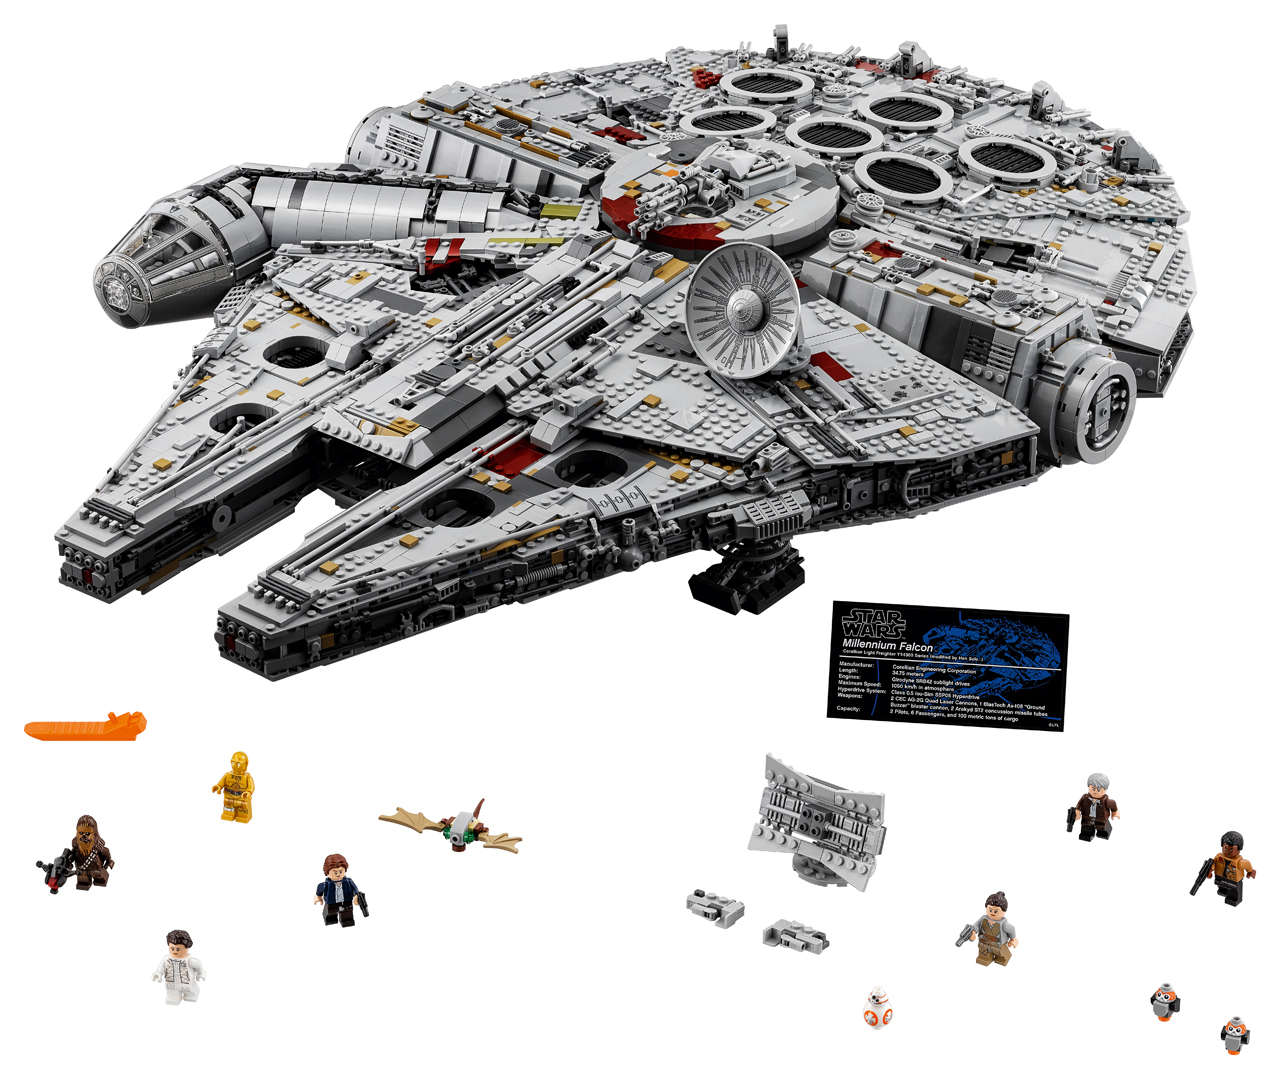 What LEGO Set has the Most Pieces